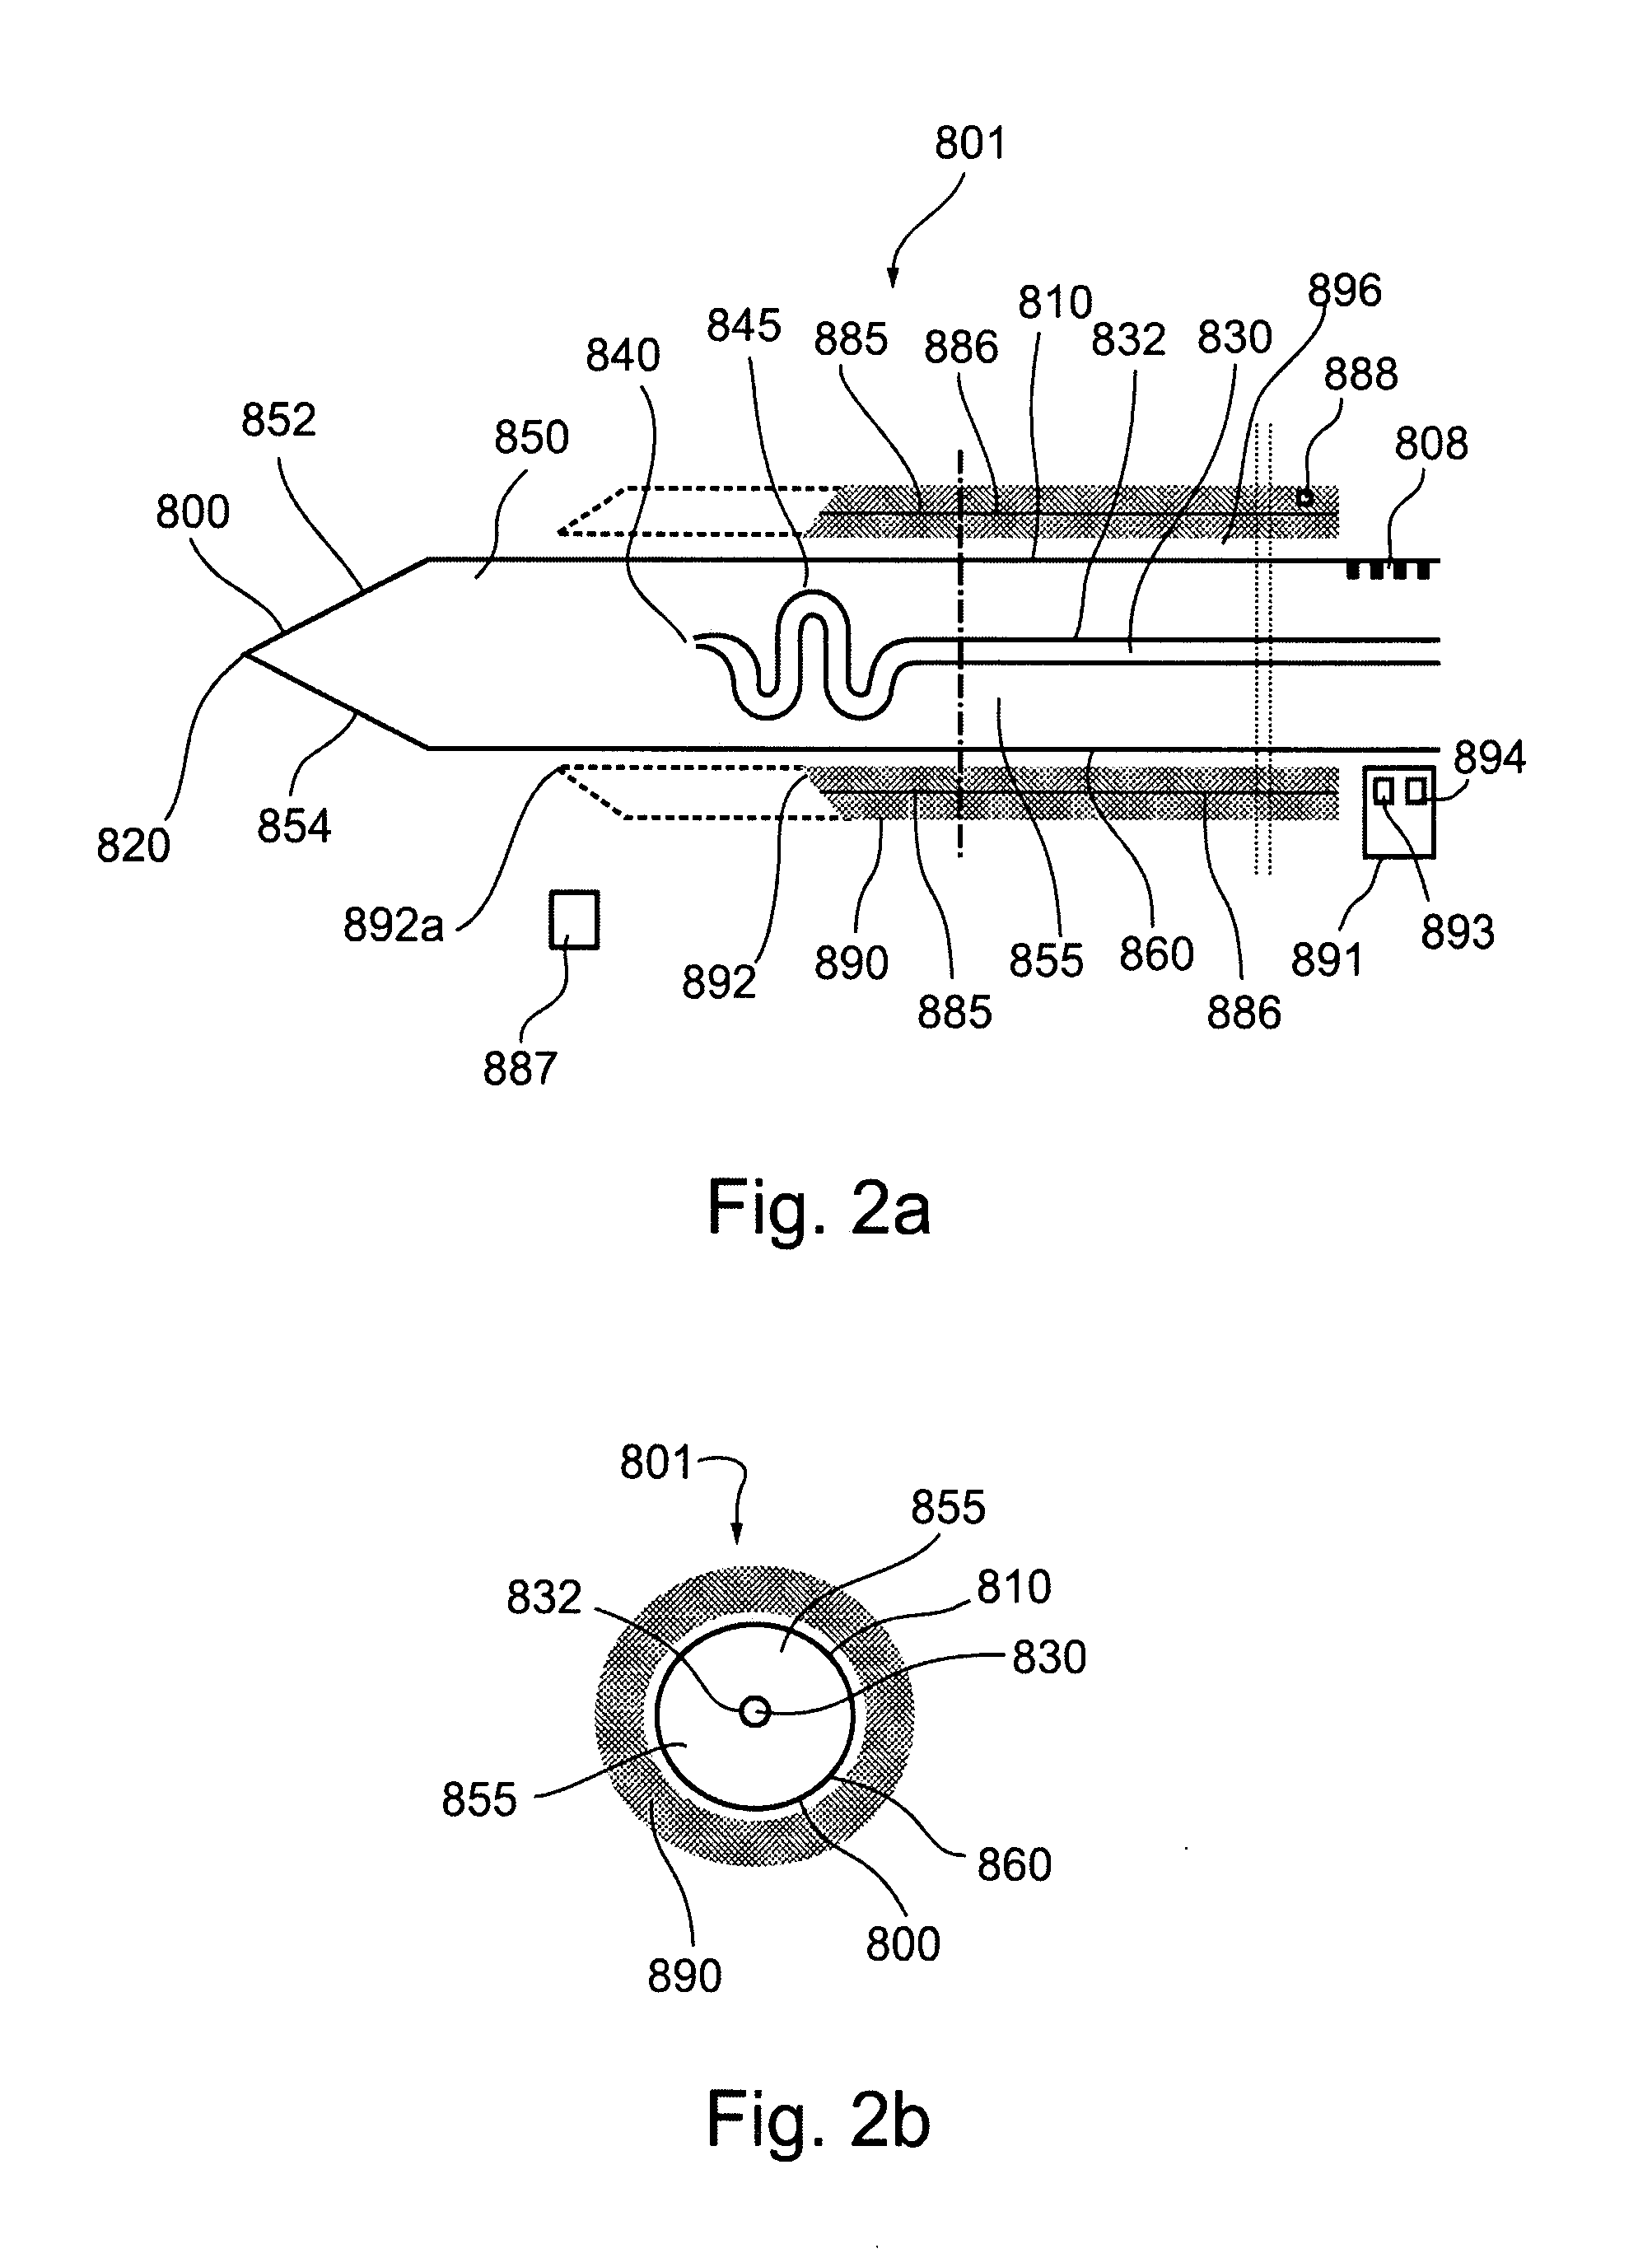 Thin uninsulated cryoprobe and insulating probe introducer